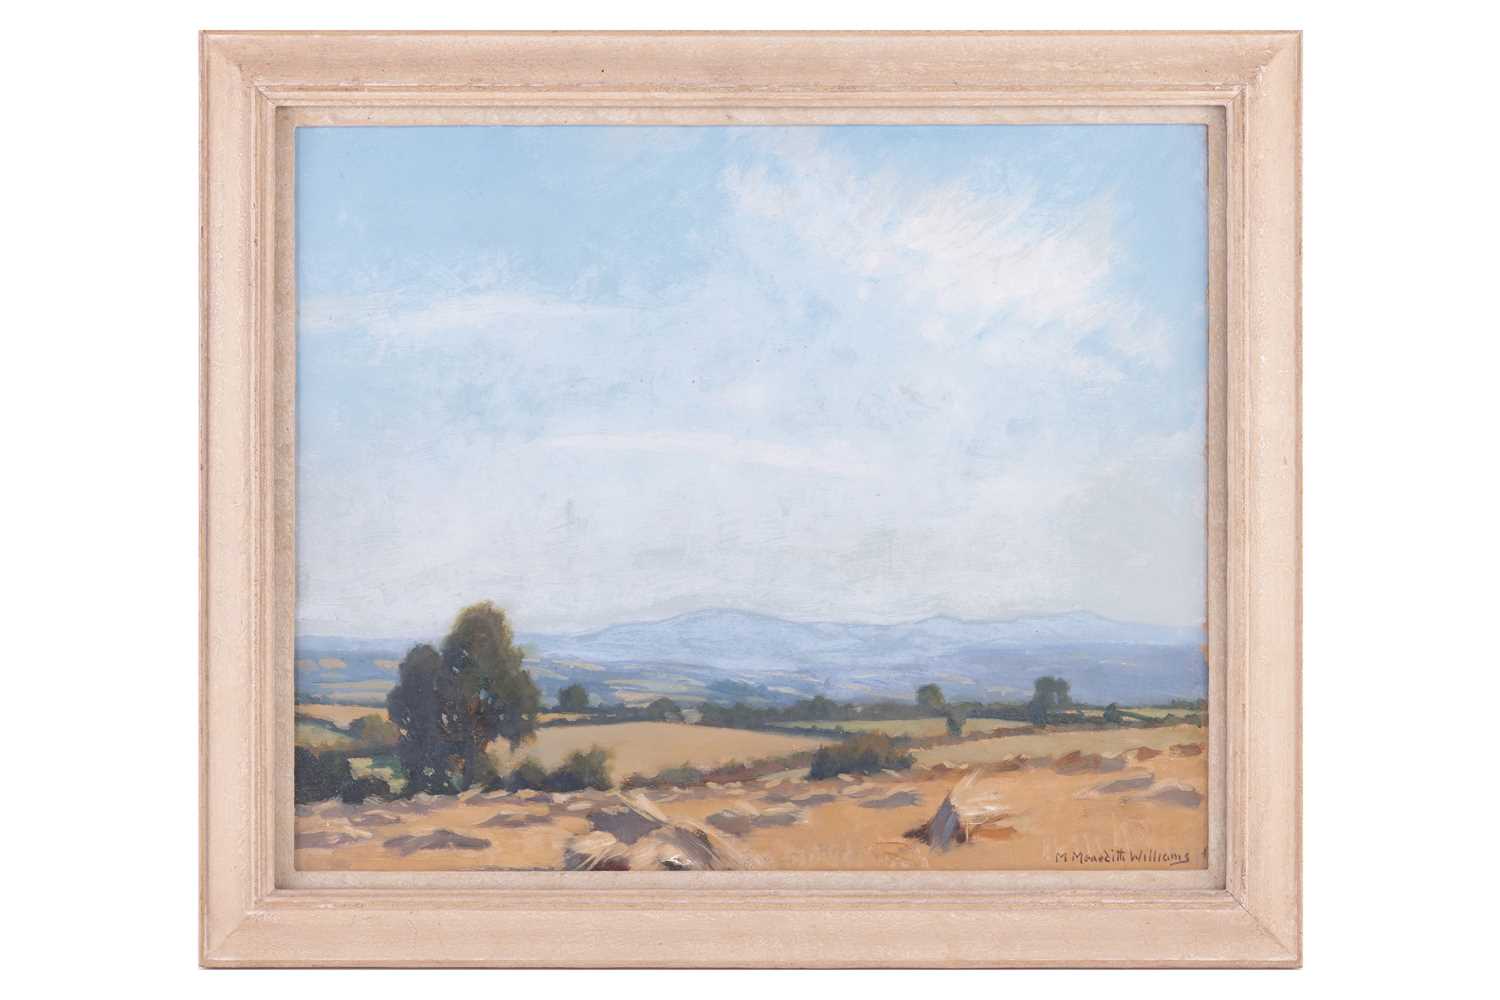 Morris Meredith Williams (1881 - 1973), 'Cosdon, Belstone and Yes Tor', signed, labelled verso, oil 